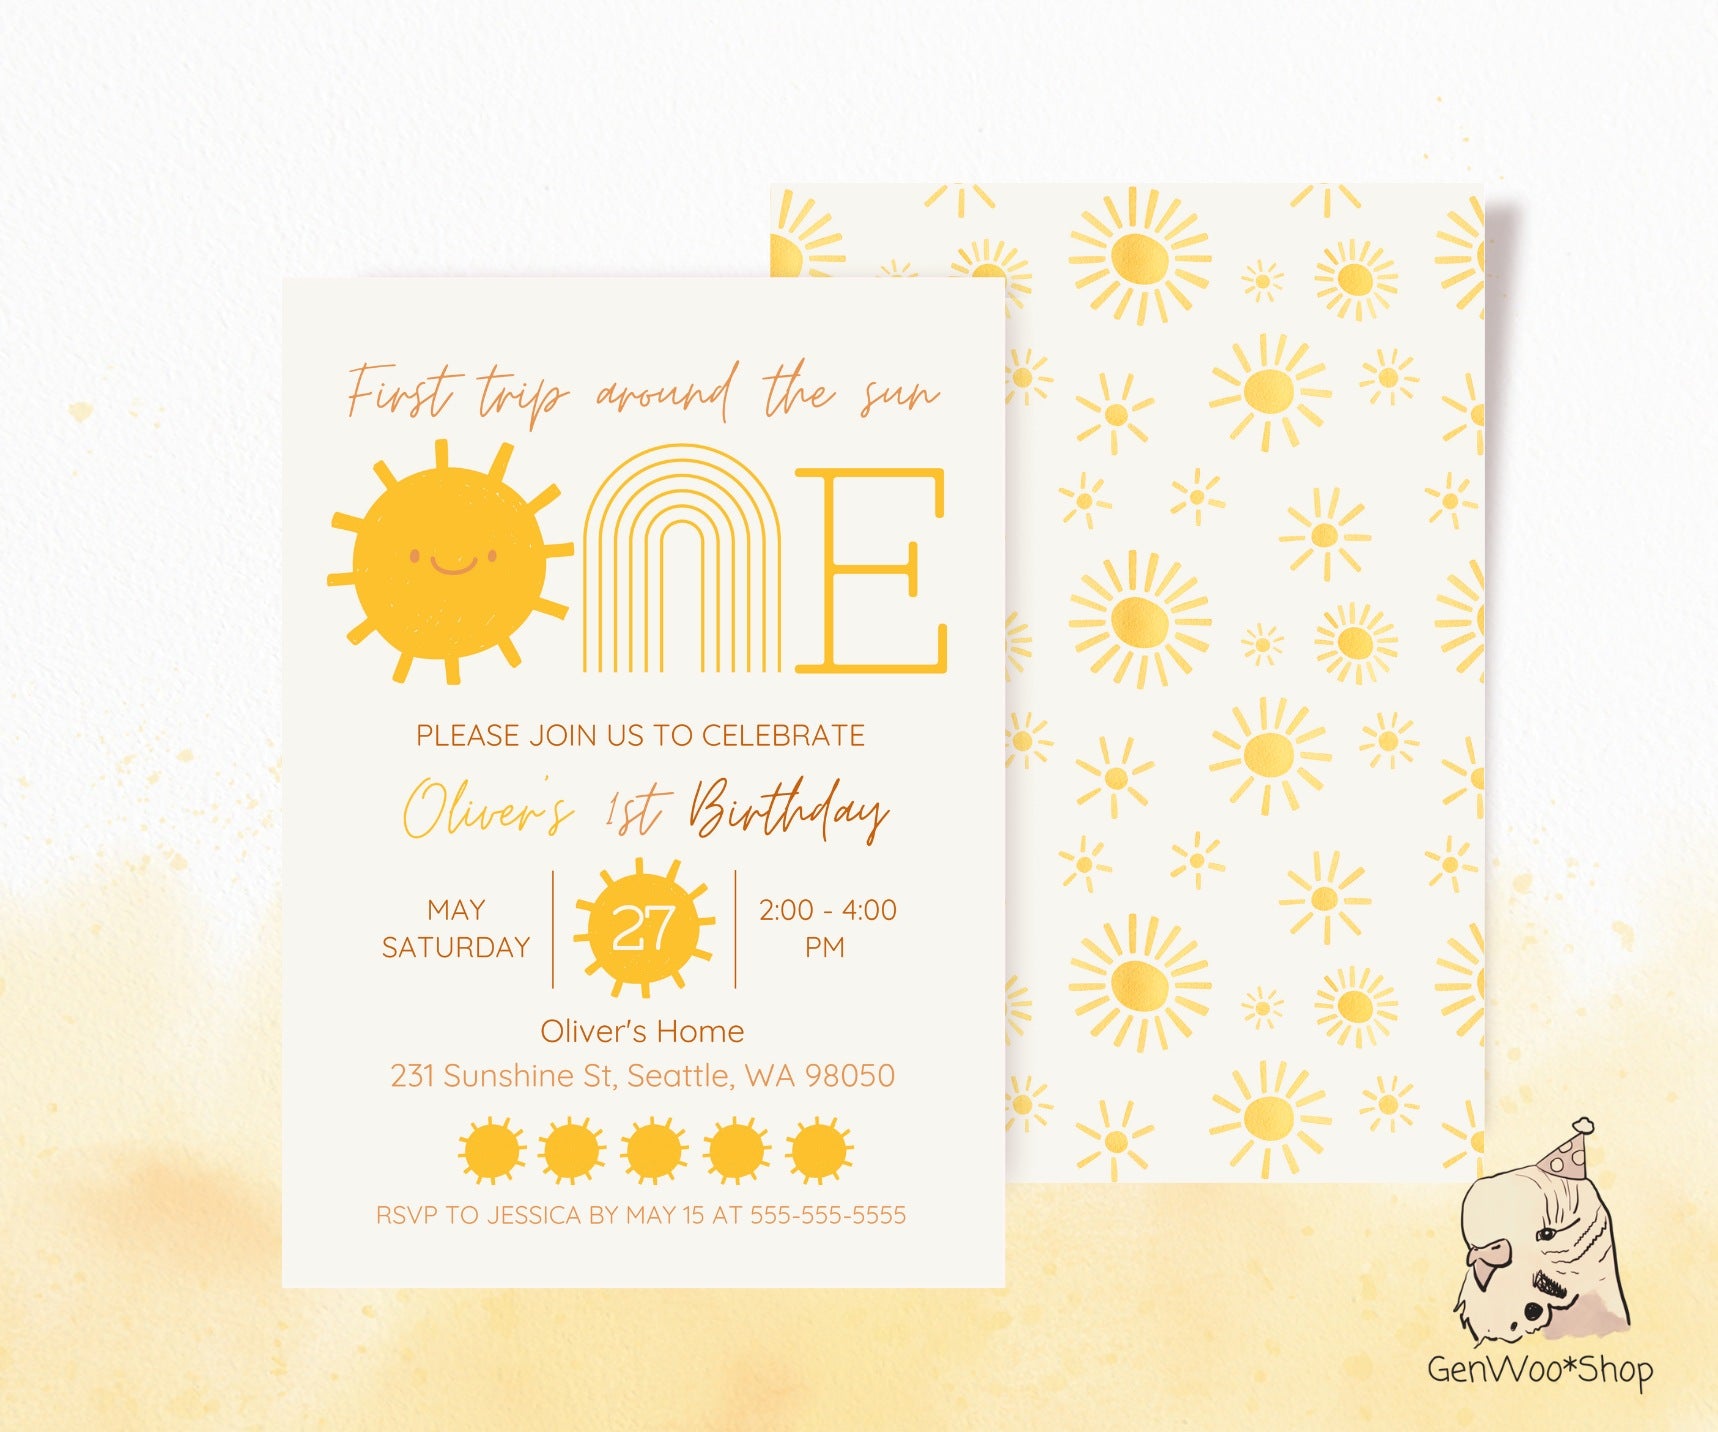 Editable Digital 1st Trip Around the Sun First Birthday Party Invitation - You are my sunshineEditable Digital 1st Trip Around the Sun First Birthday Party Invitation - You are my sunshine